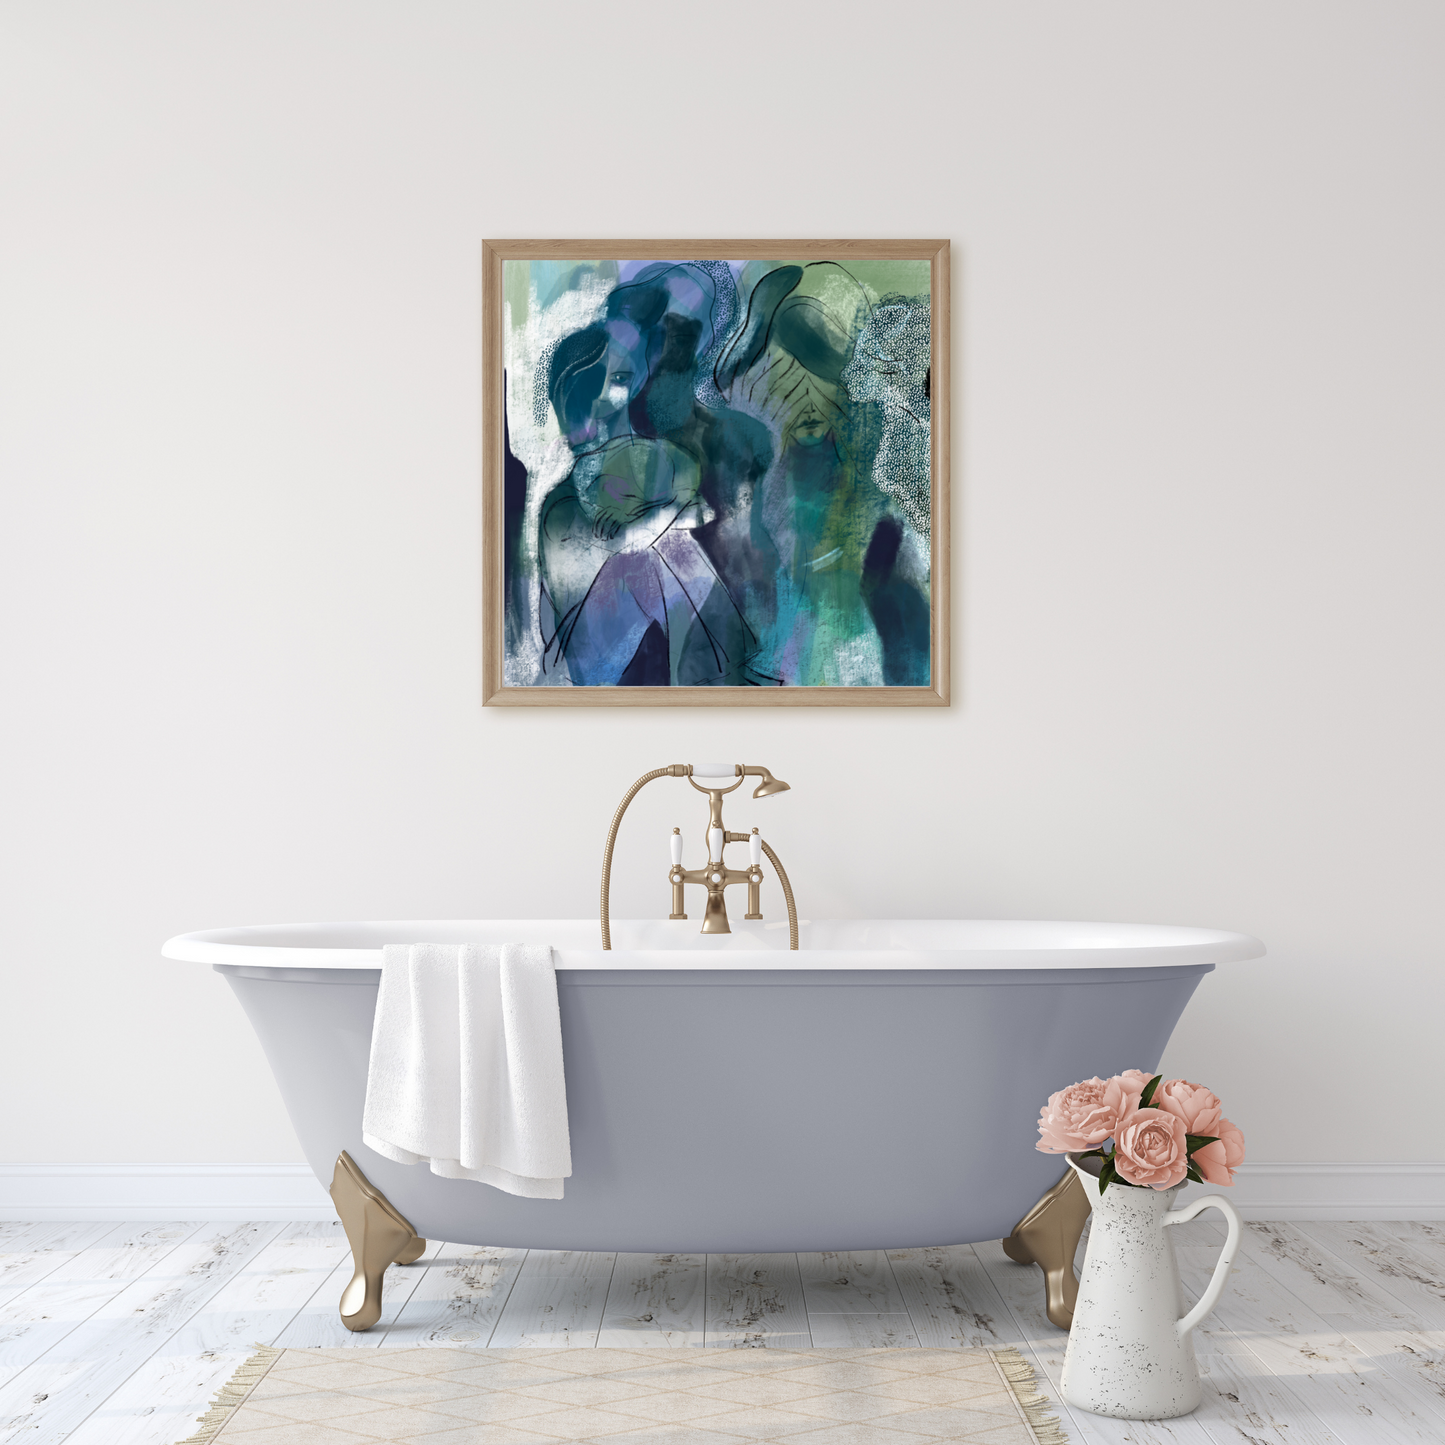 An example of the Sedative painting in a bathroom